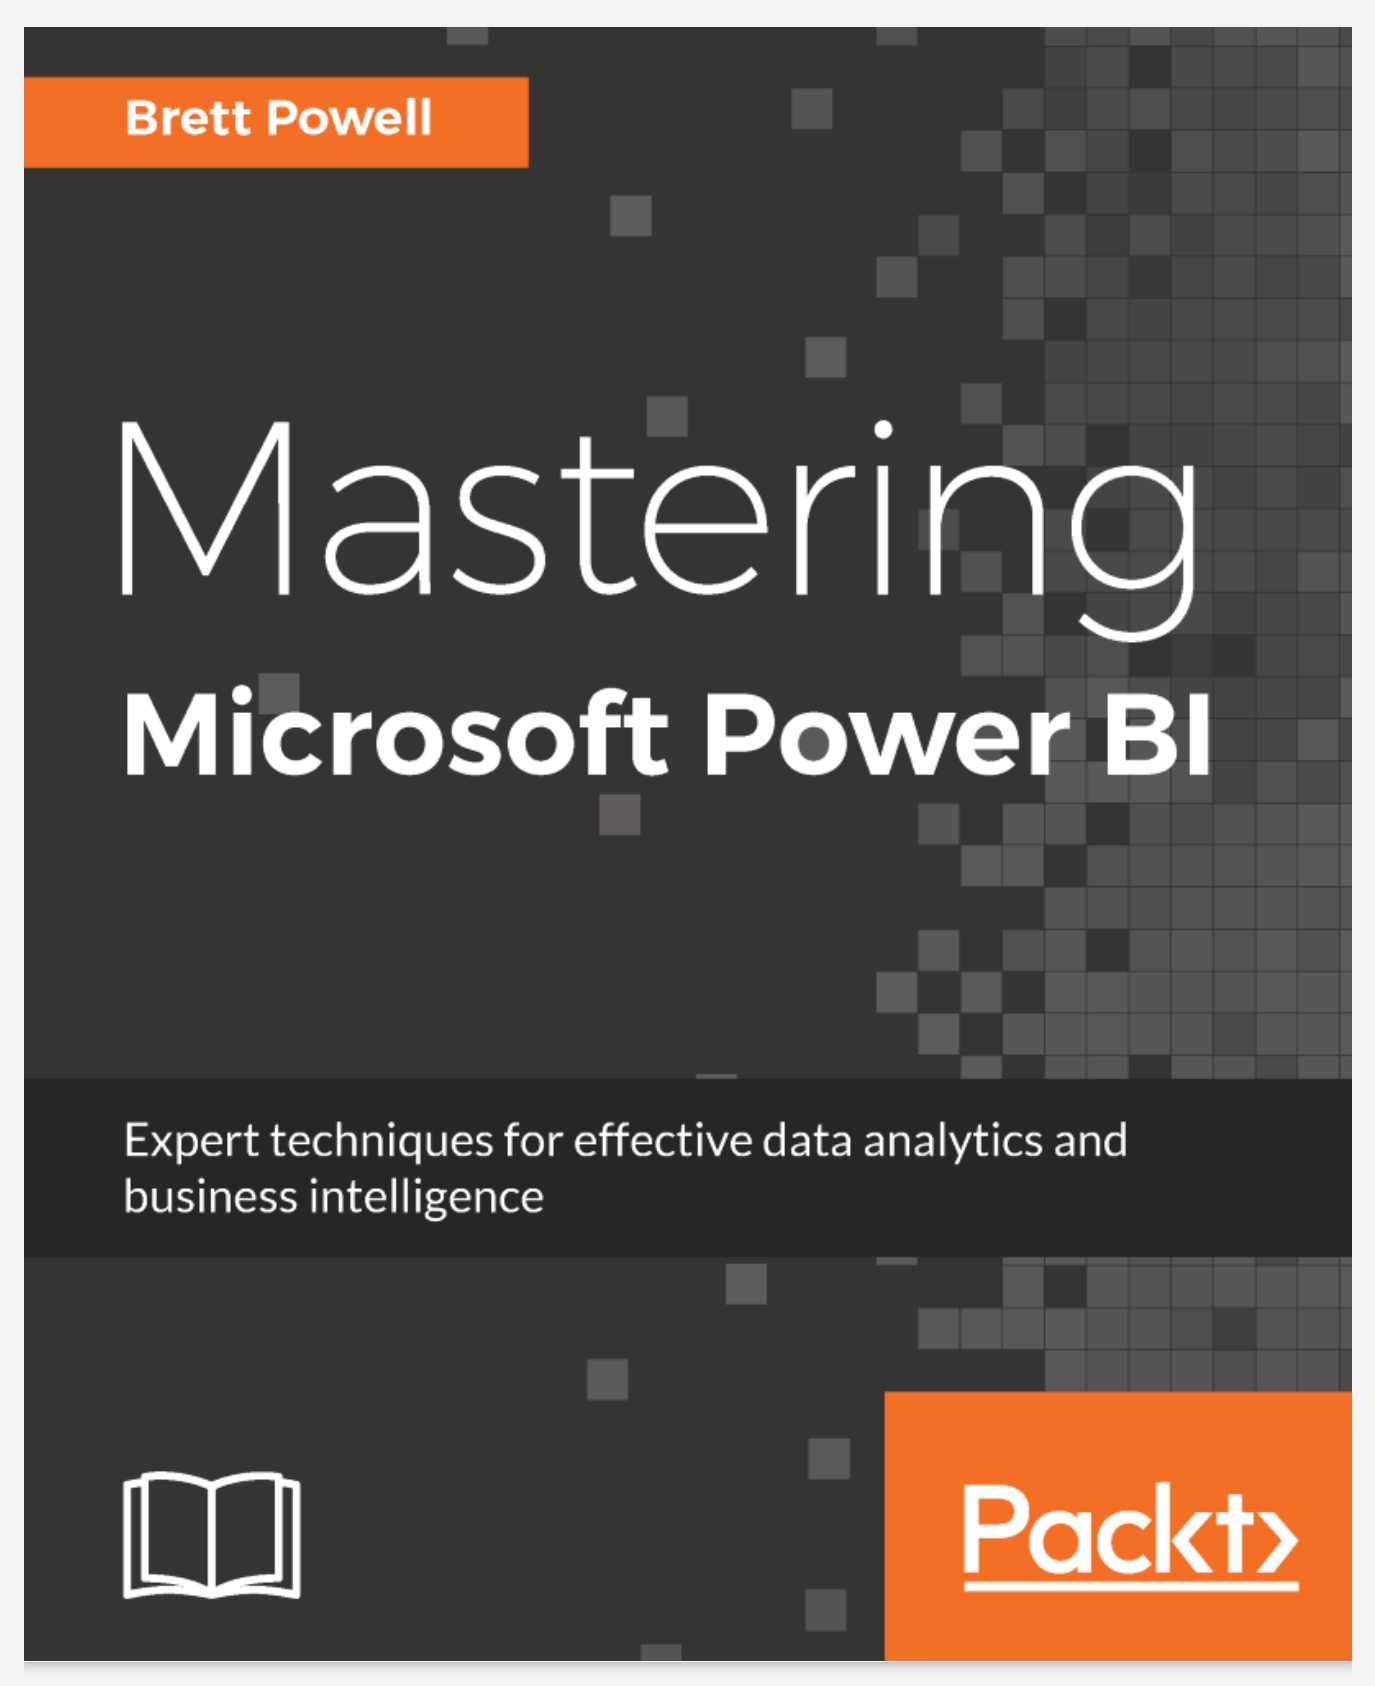 Mastering Microsoft Power BI: Expert techniques for effective data analytics and business intelligence